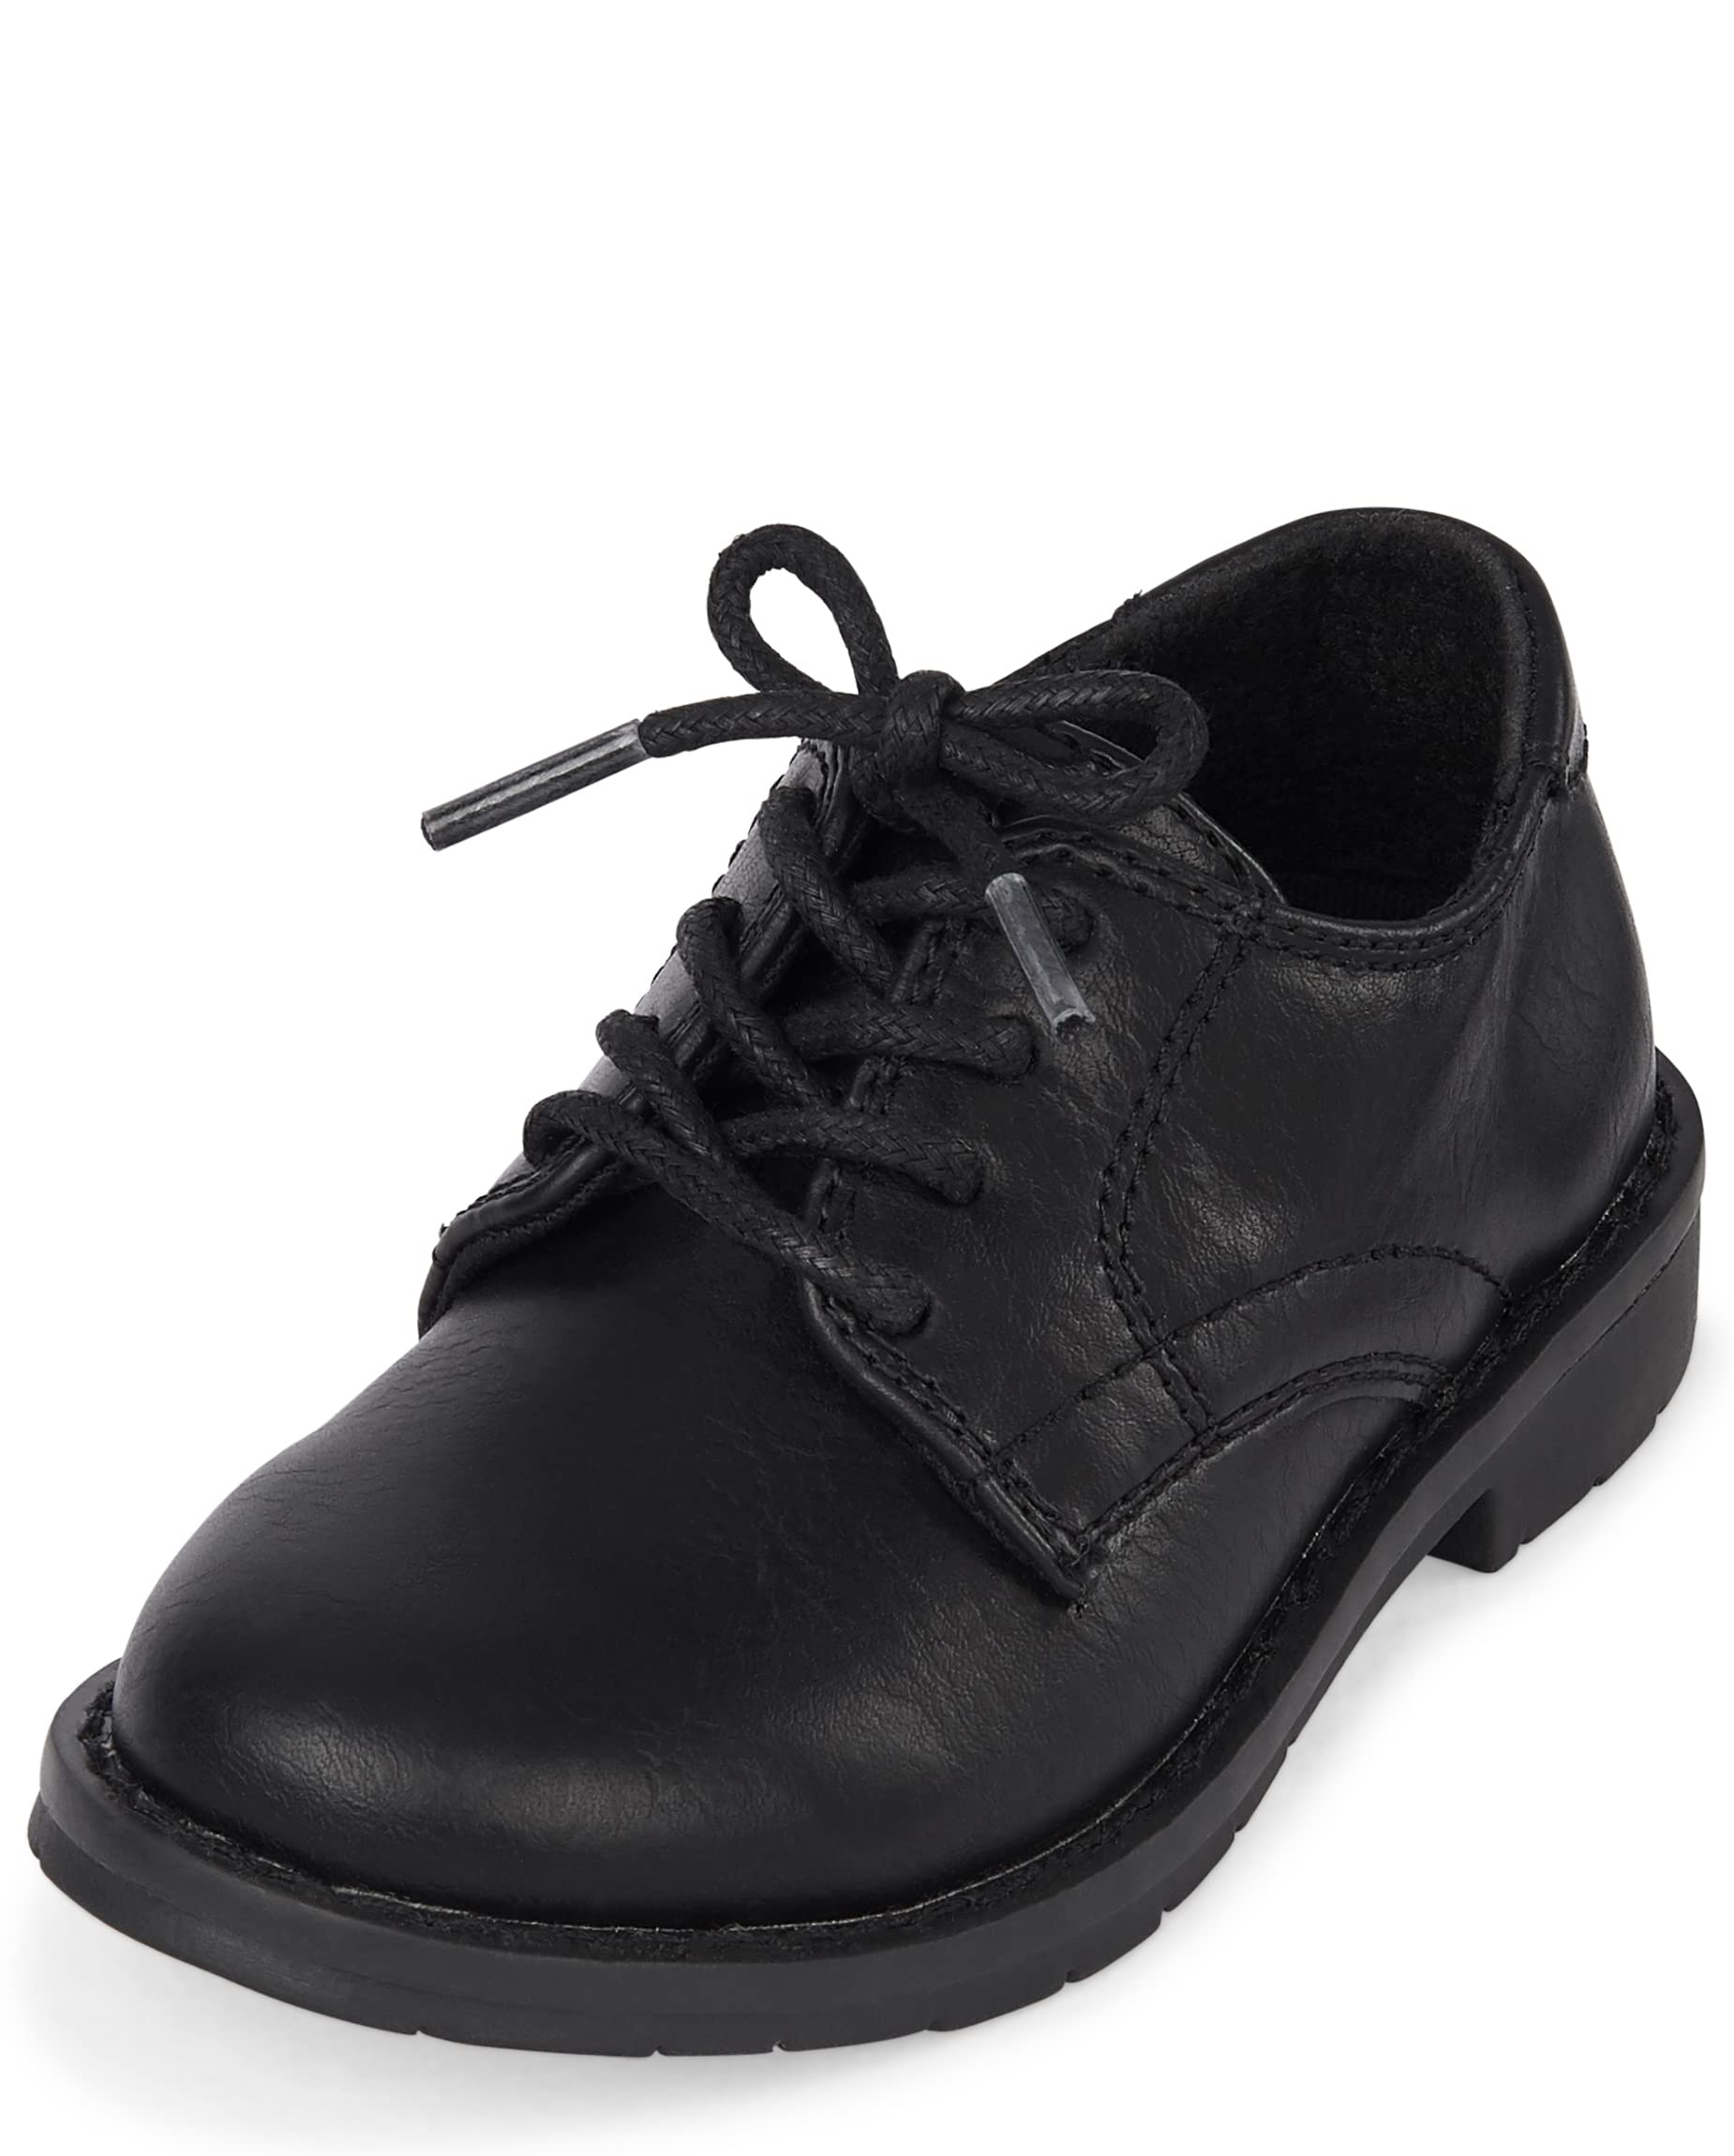 The Children's Place Unisex-Child and Toddler Lace Up Dress Shoes Penny Loafer